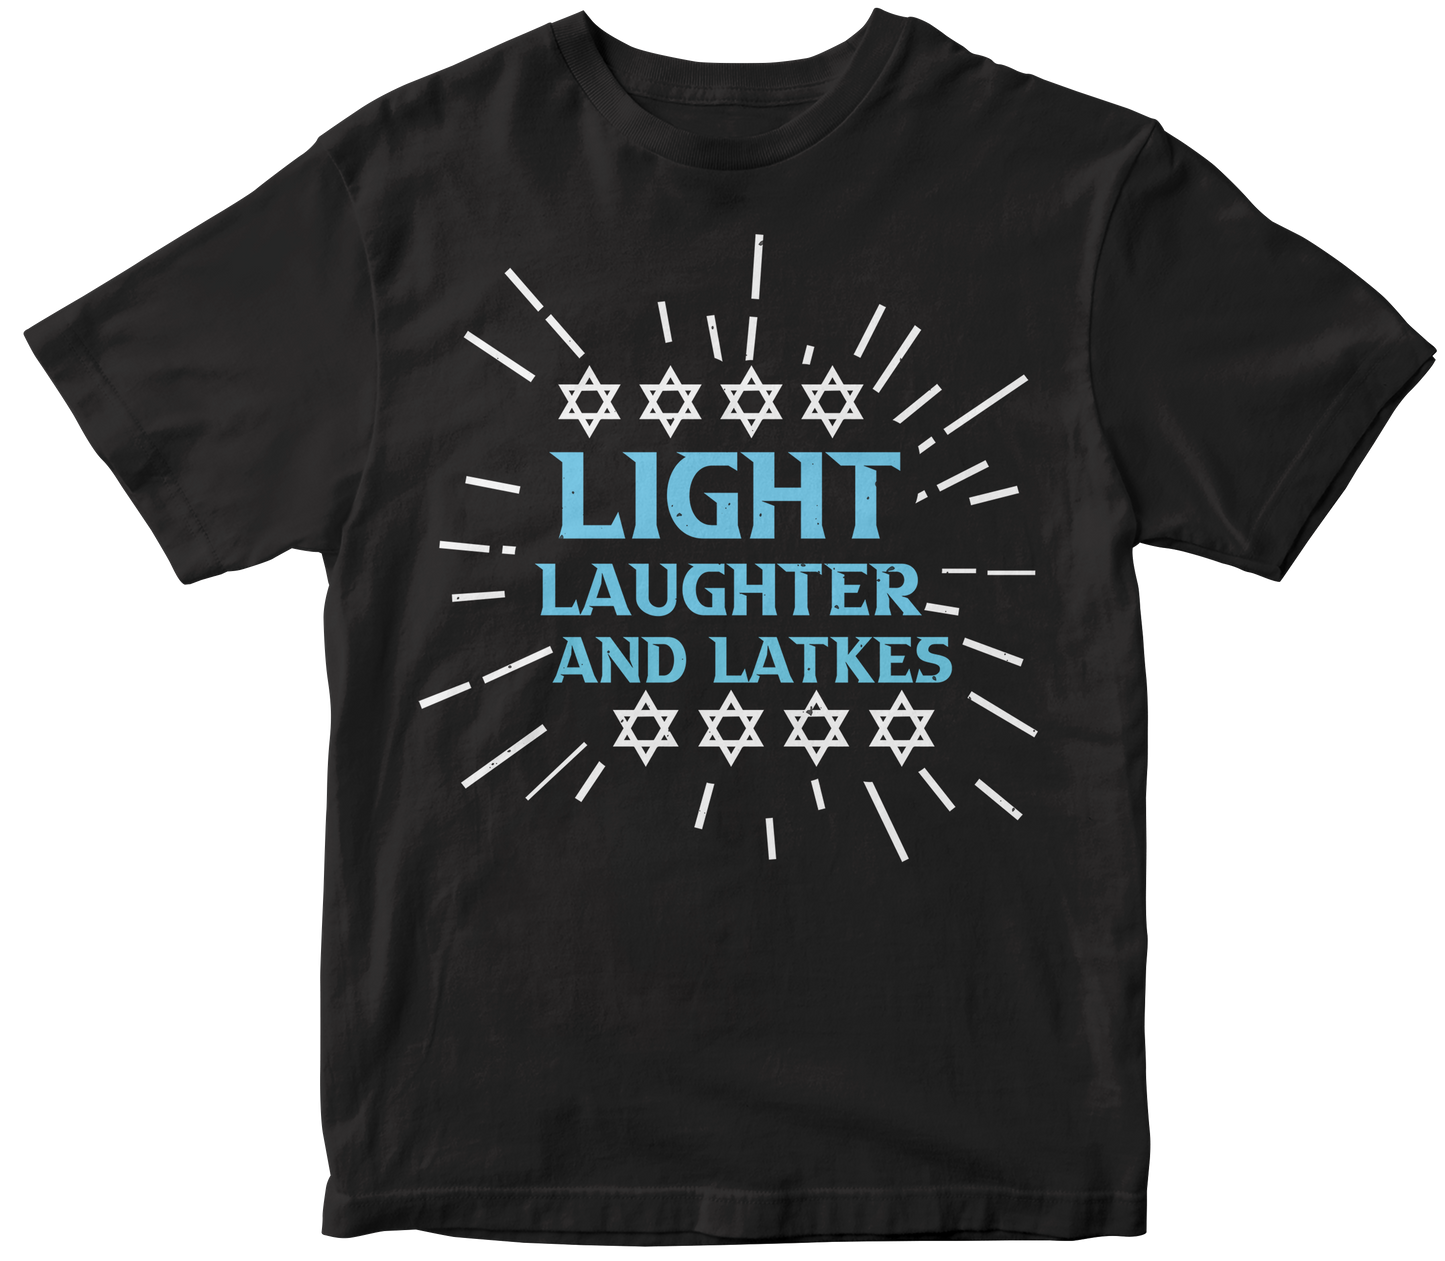 Light laughter and latkes